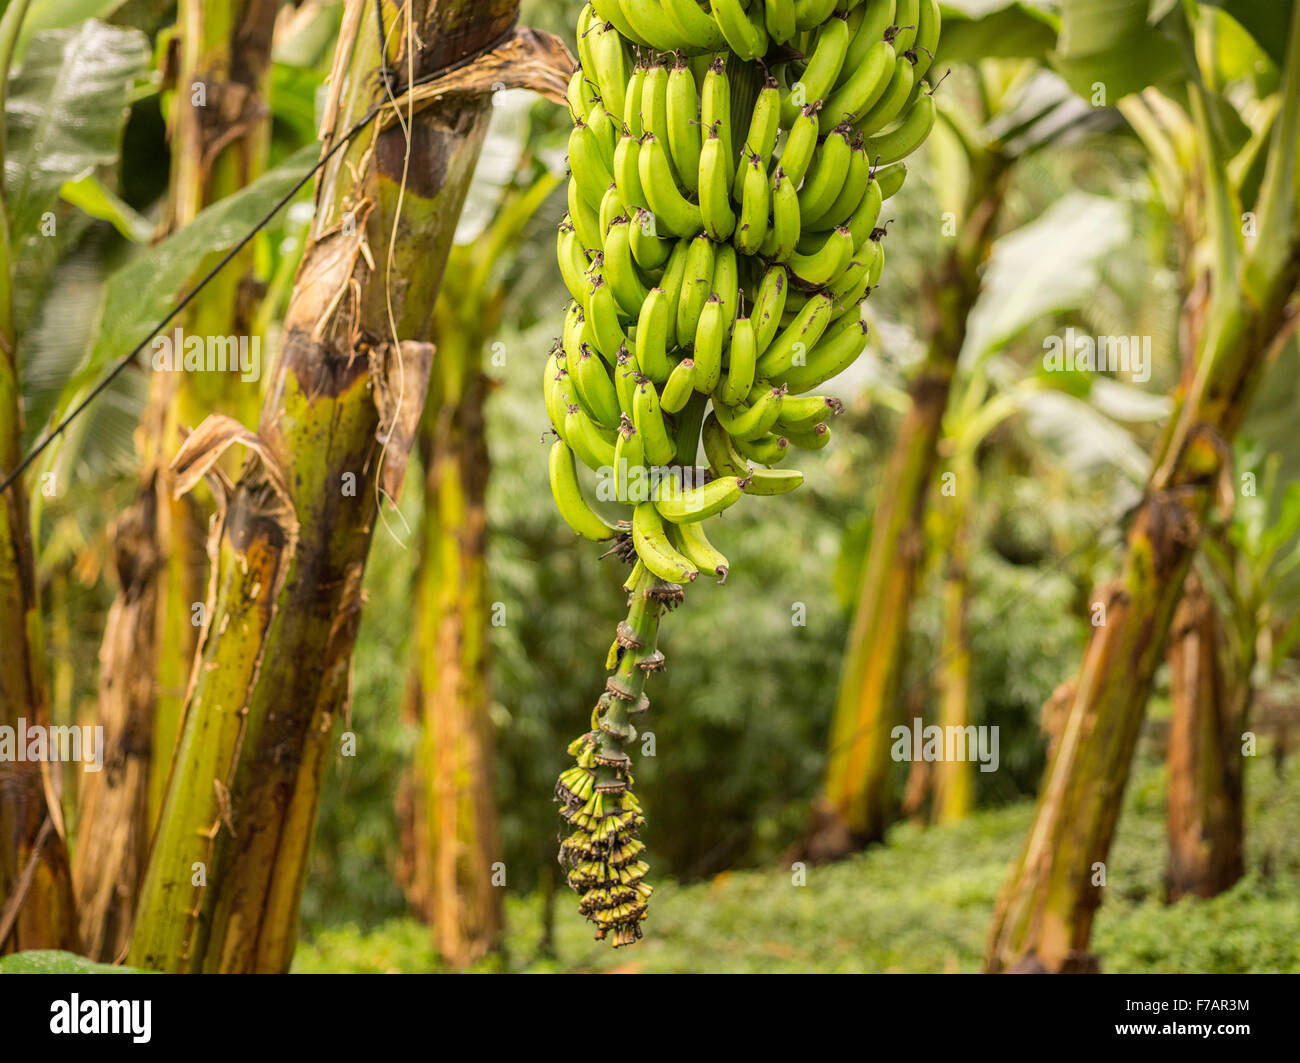 A Banana plant/herb amongst others Stock Photo